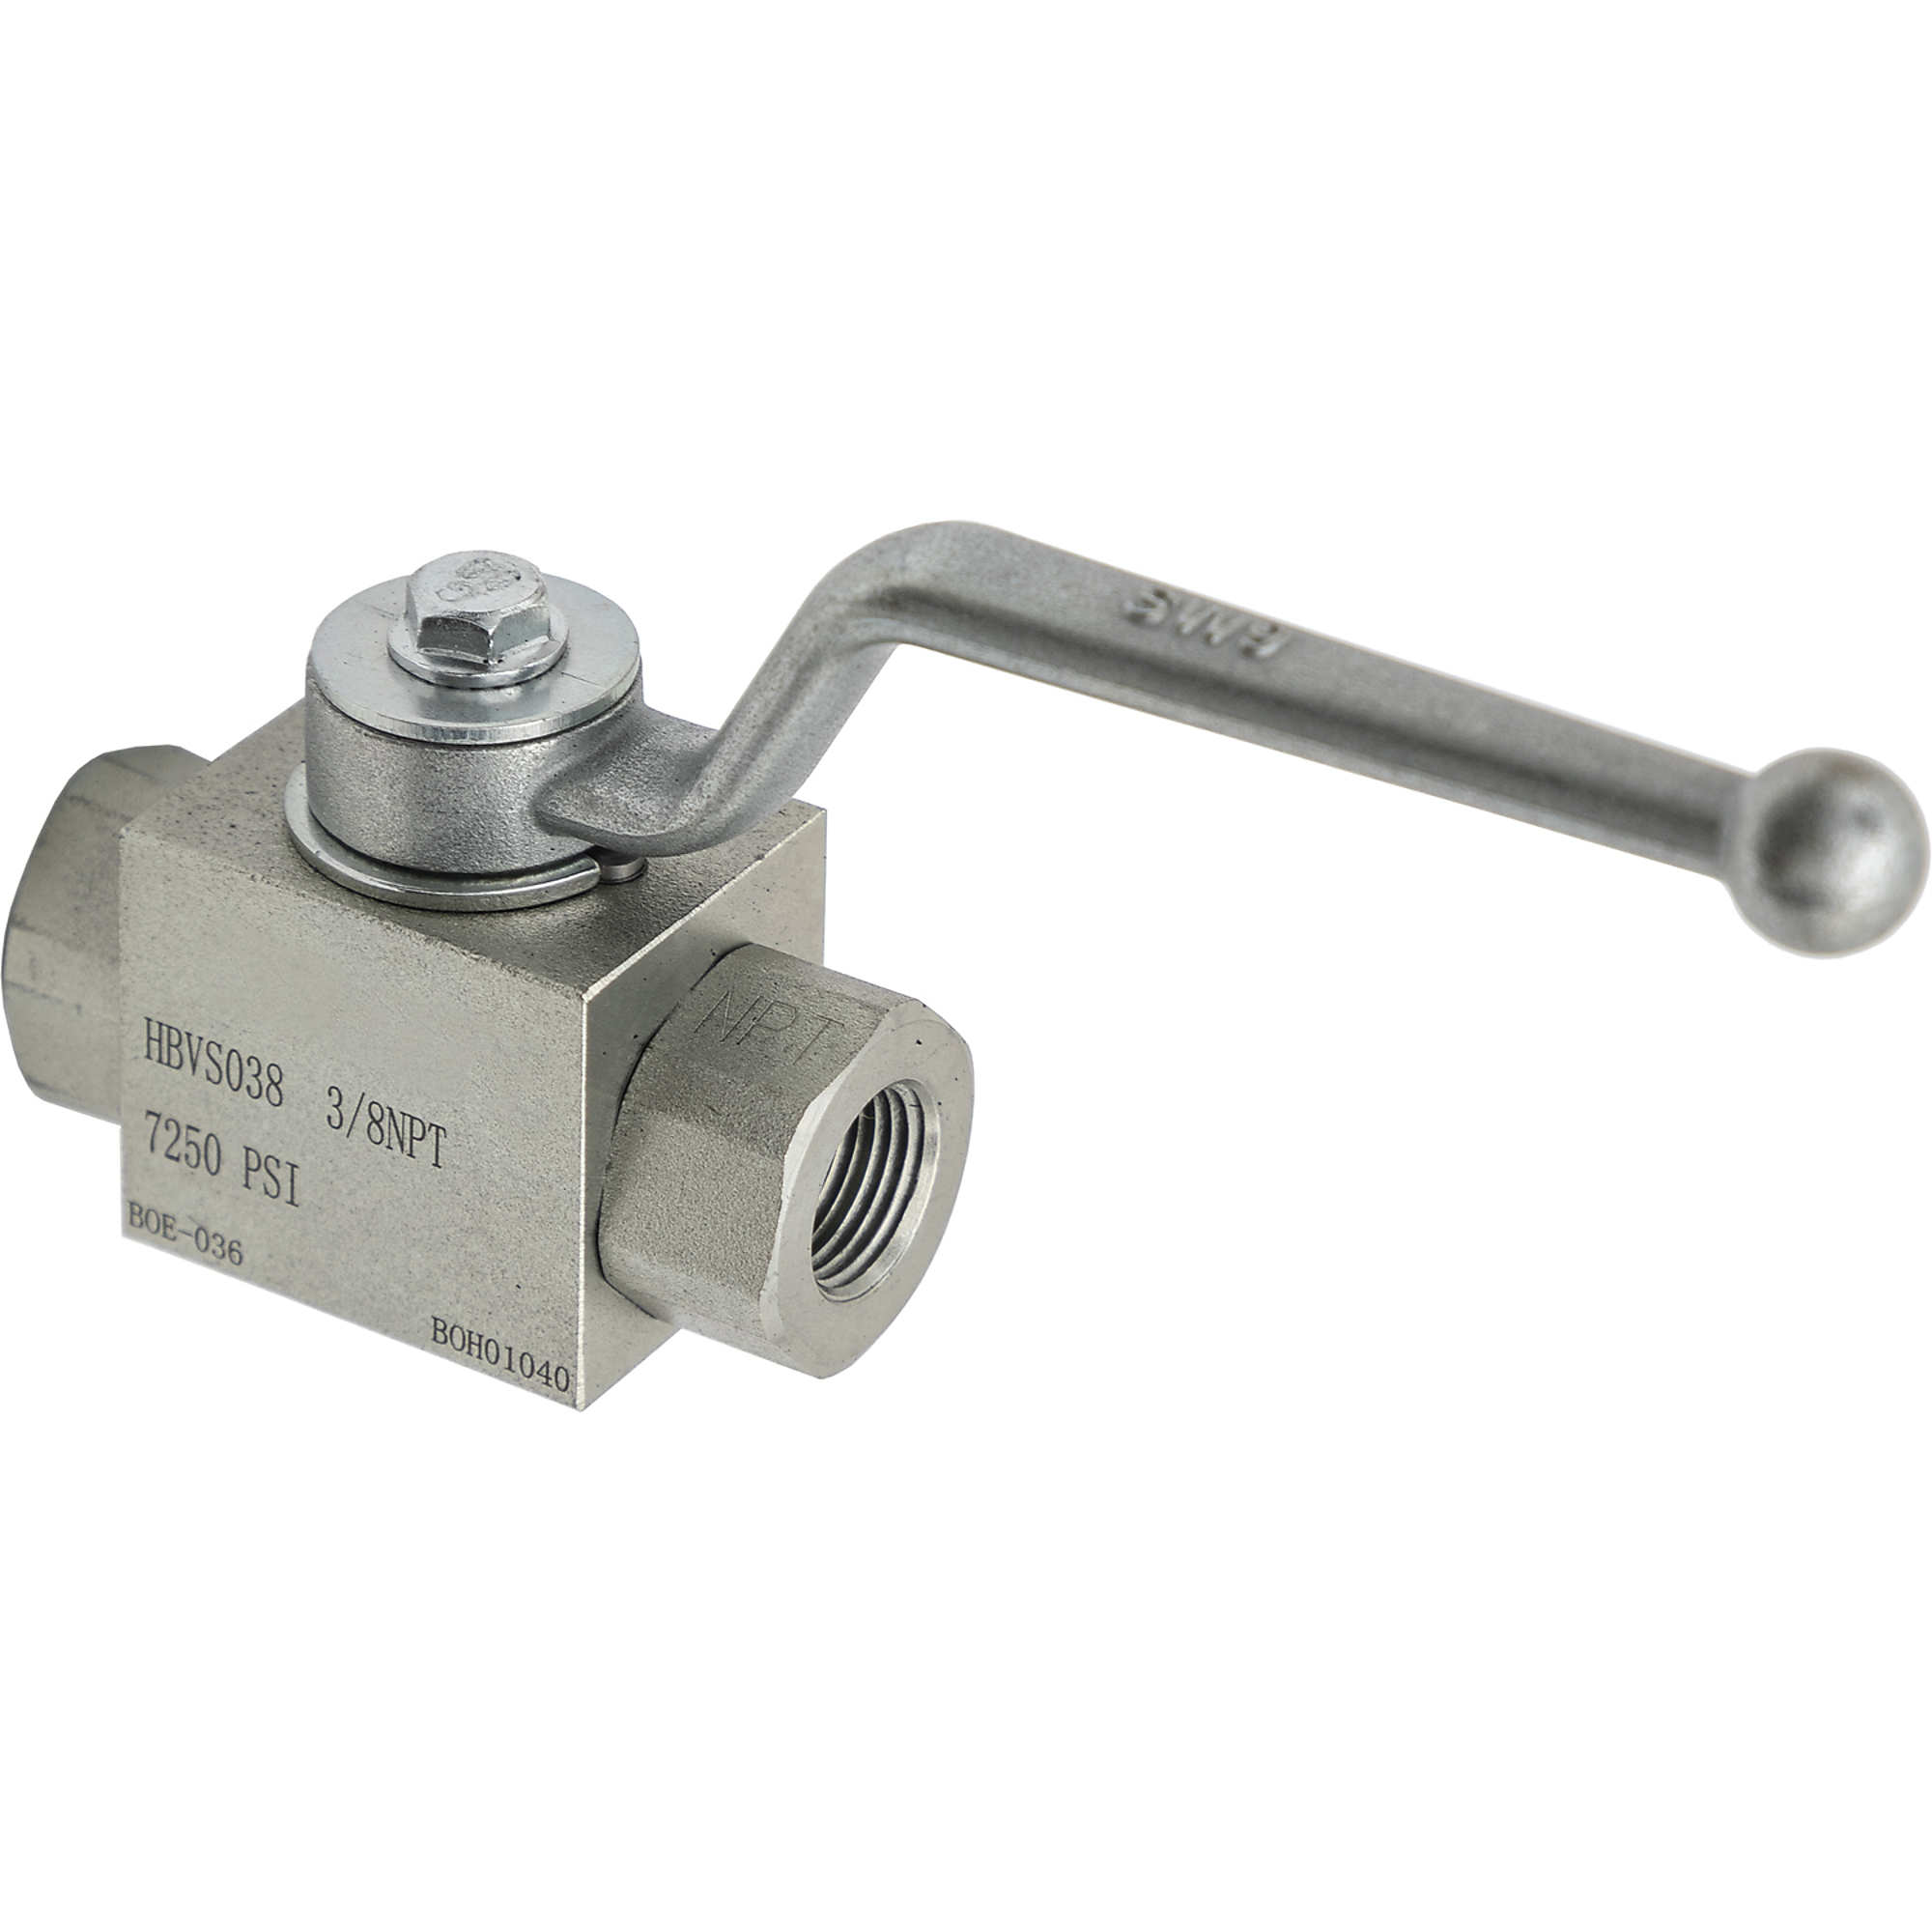 Buyers Products, 3/8Inch NPTF 2-Port High Pressure Ball Valve, Working Port 3/8 NPT in, Max. PSI 7250 Model HBVS038